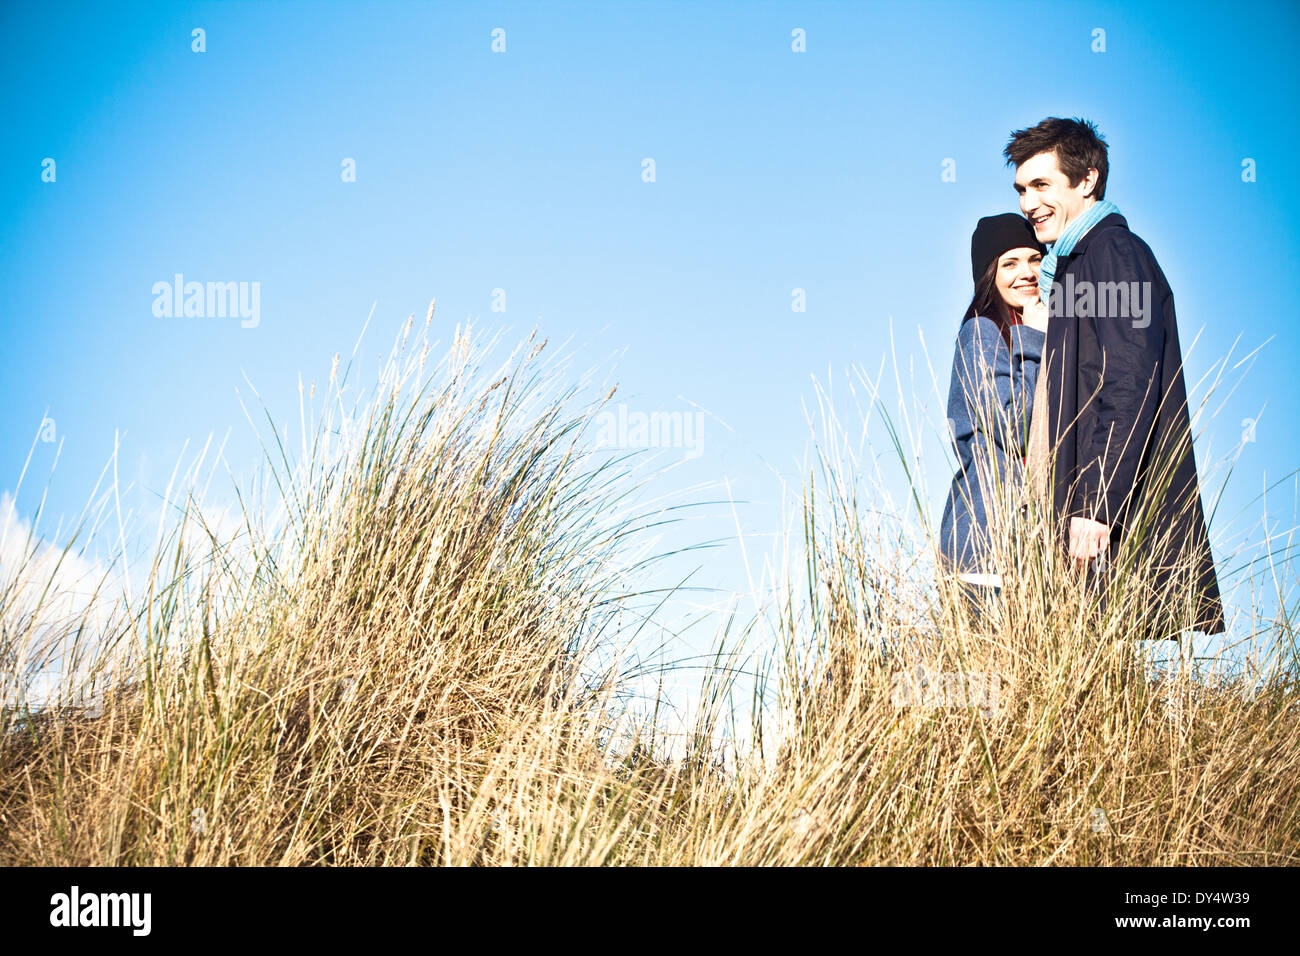 Couple standing in sand dunes, Bournemouth, Dorset, UK Banque D'Images